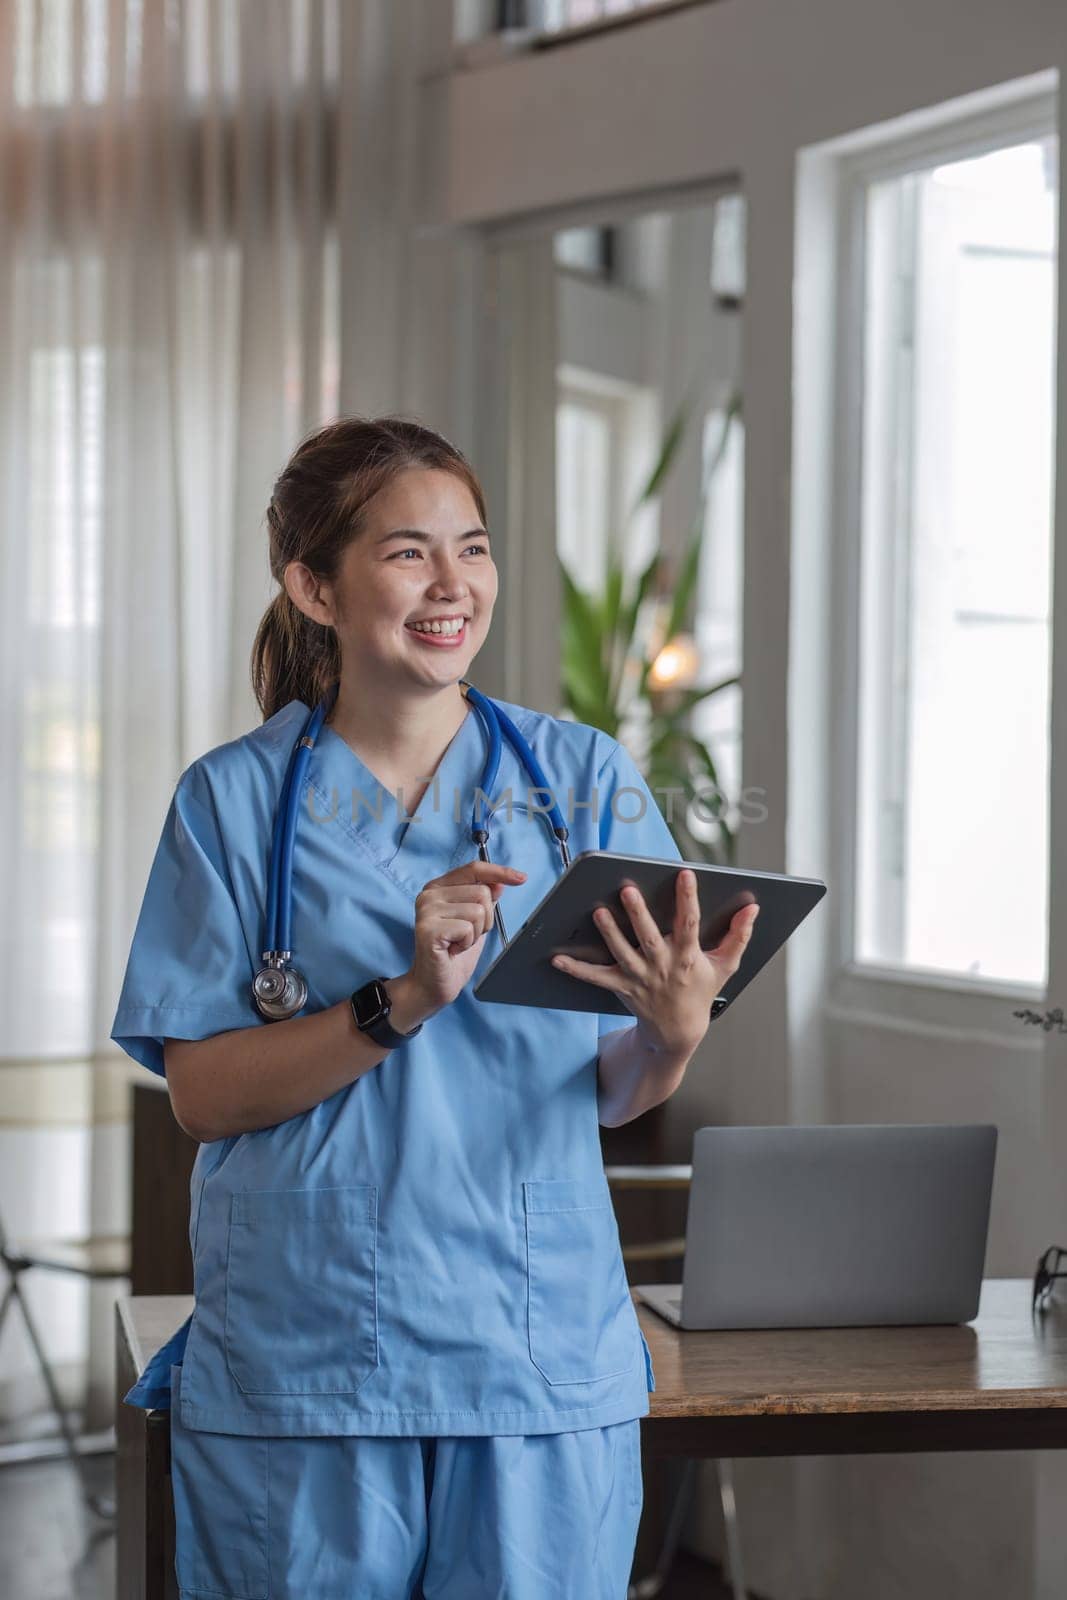 Portrait of a smiling female doctor holding a digital tablet wearing a medical coat and stethoscope in hospital.